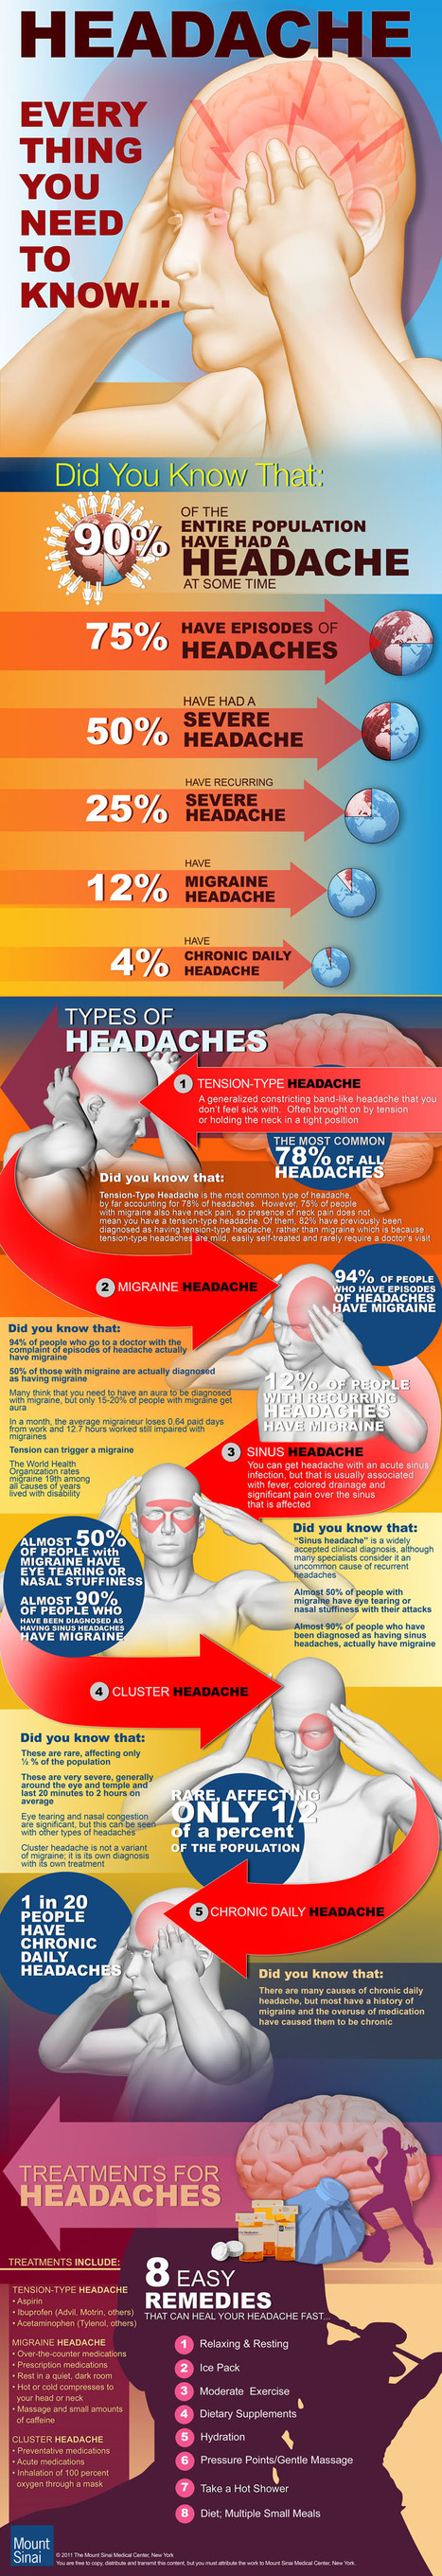 Health Tips: 90% of World Population Suffering from Headache [How to Prevent] | All Infographics | Physical and Mental Health - Exercise, Fitness and Activity | Scoop.it